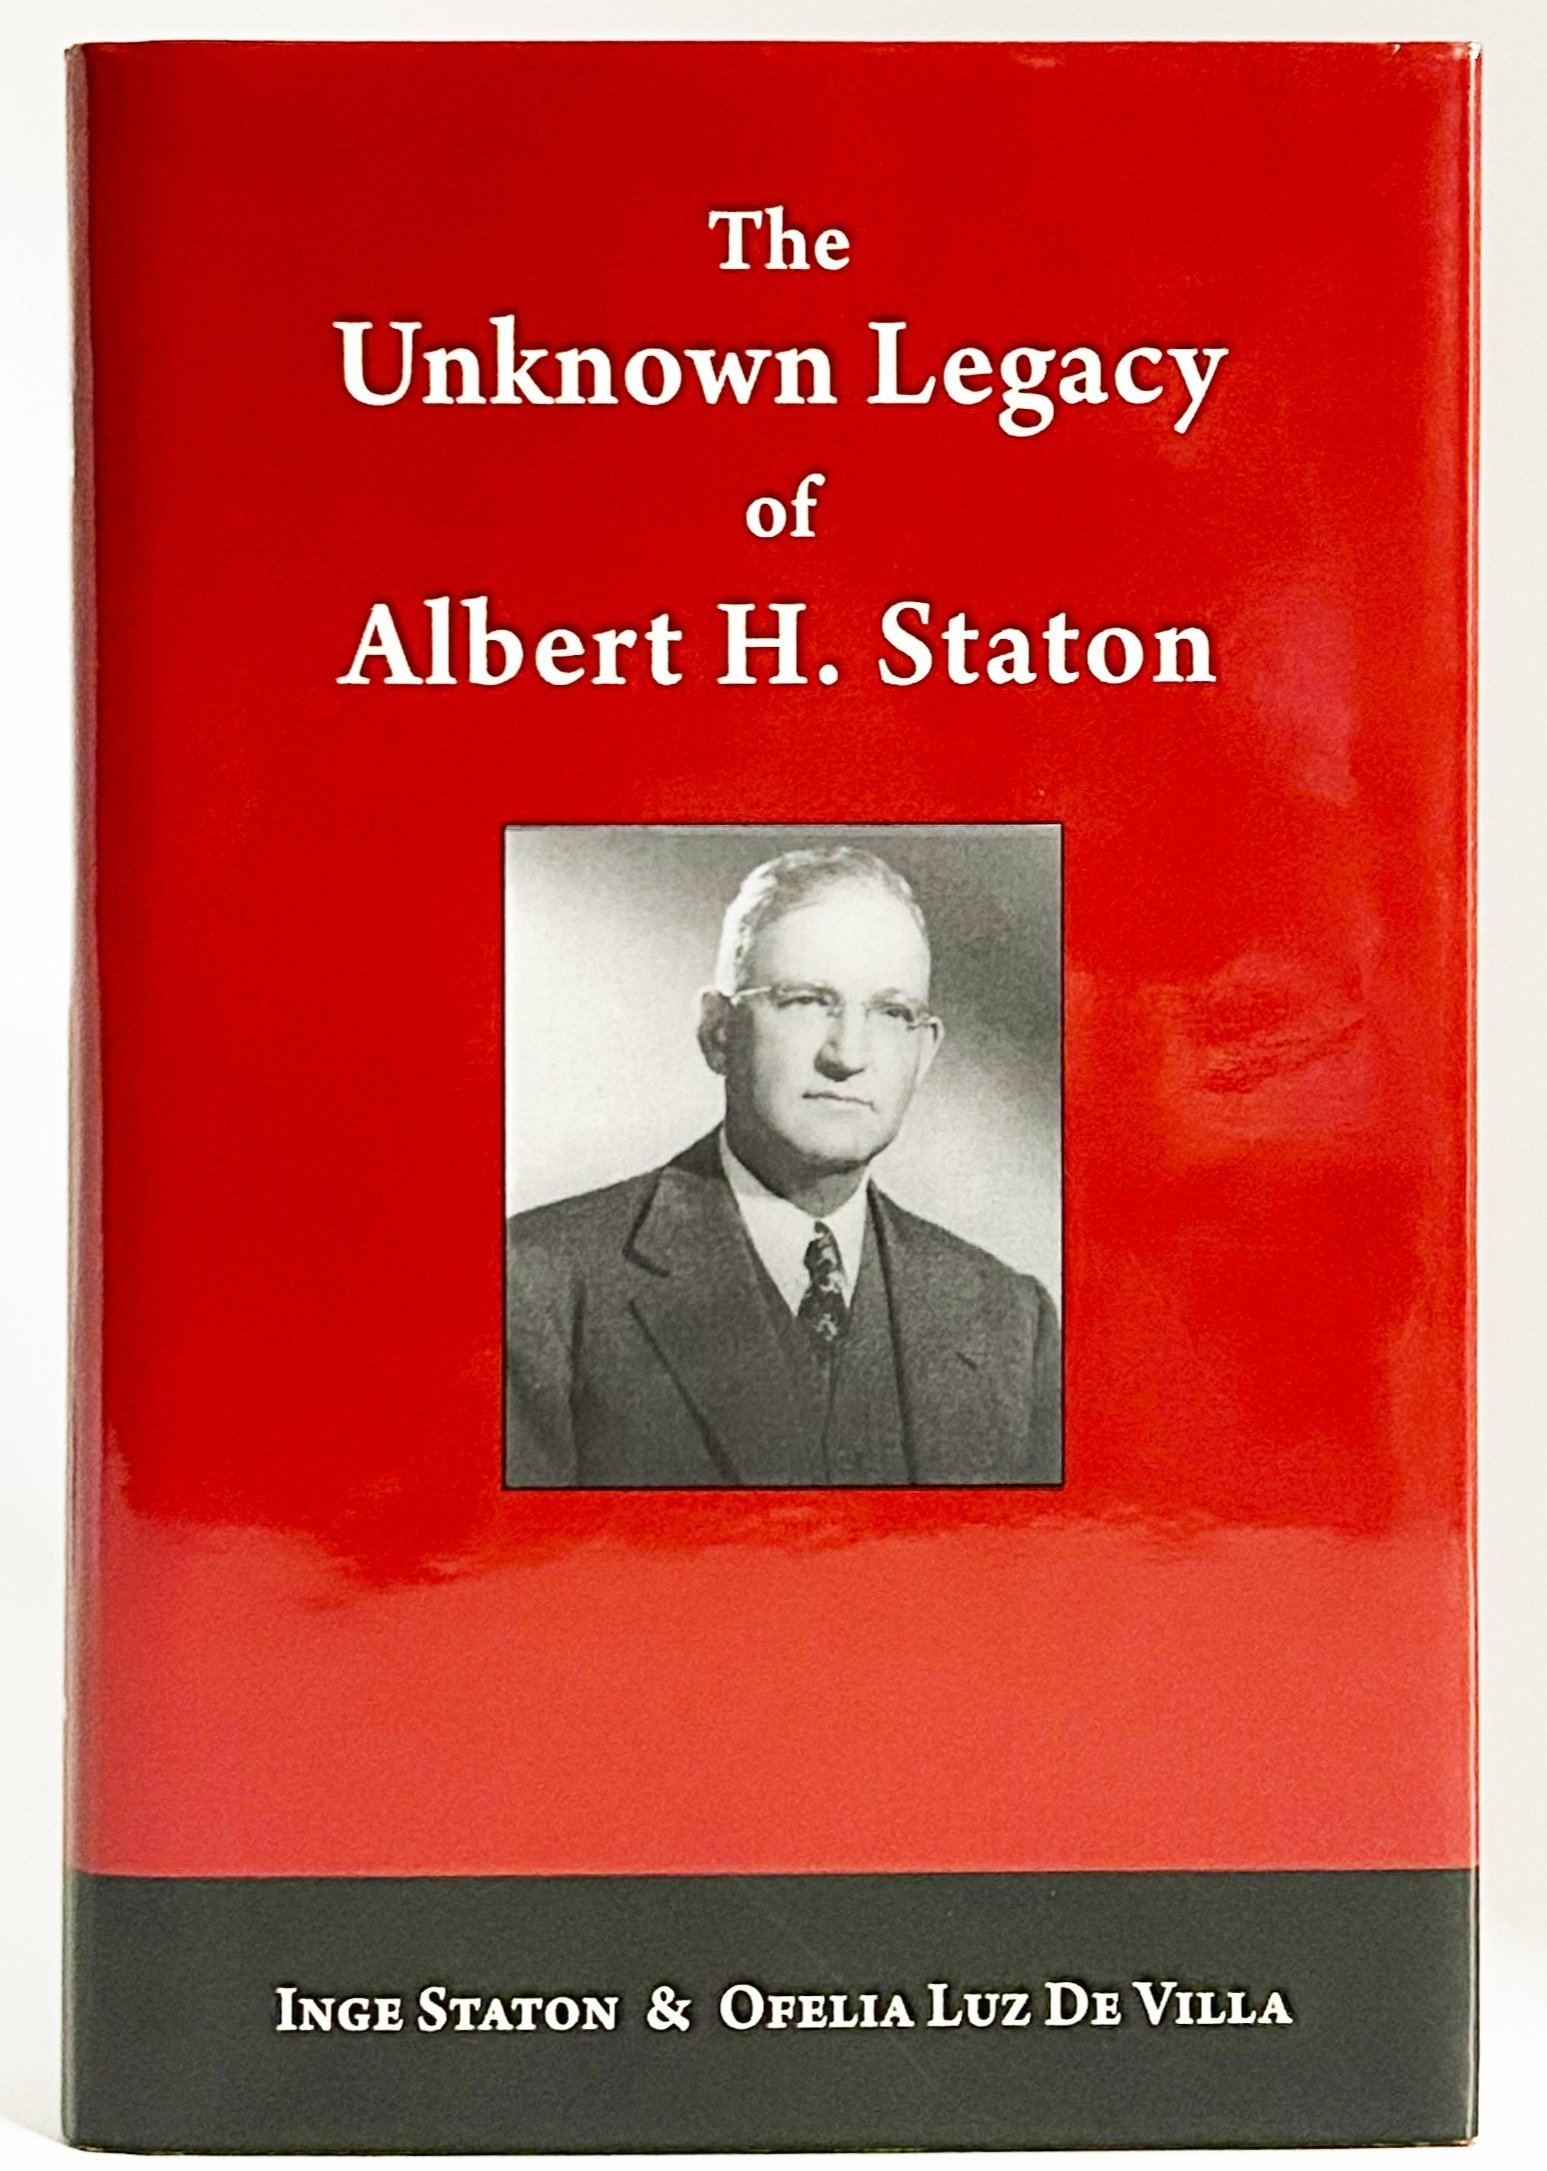 The Unknown Legacy of Albert H. Staton (2015)